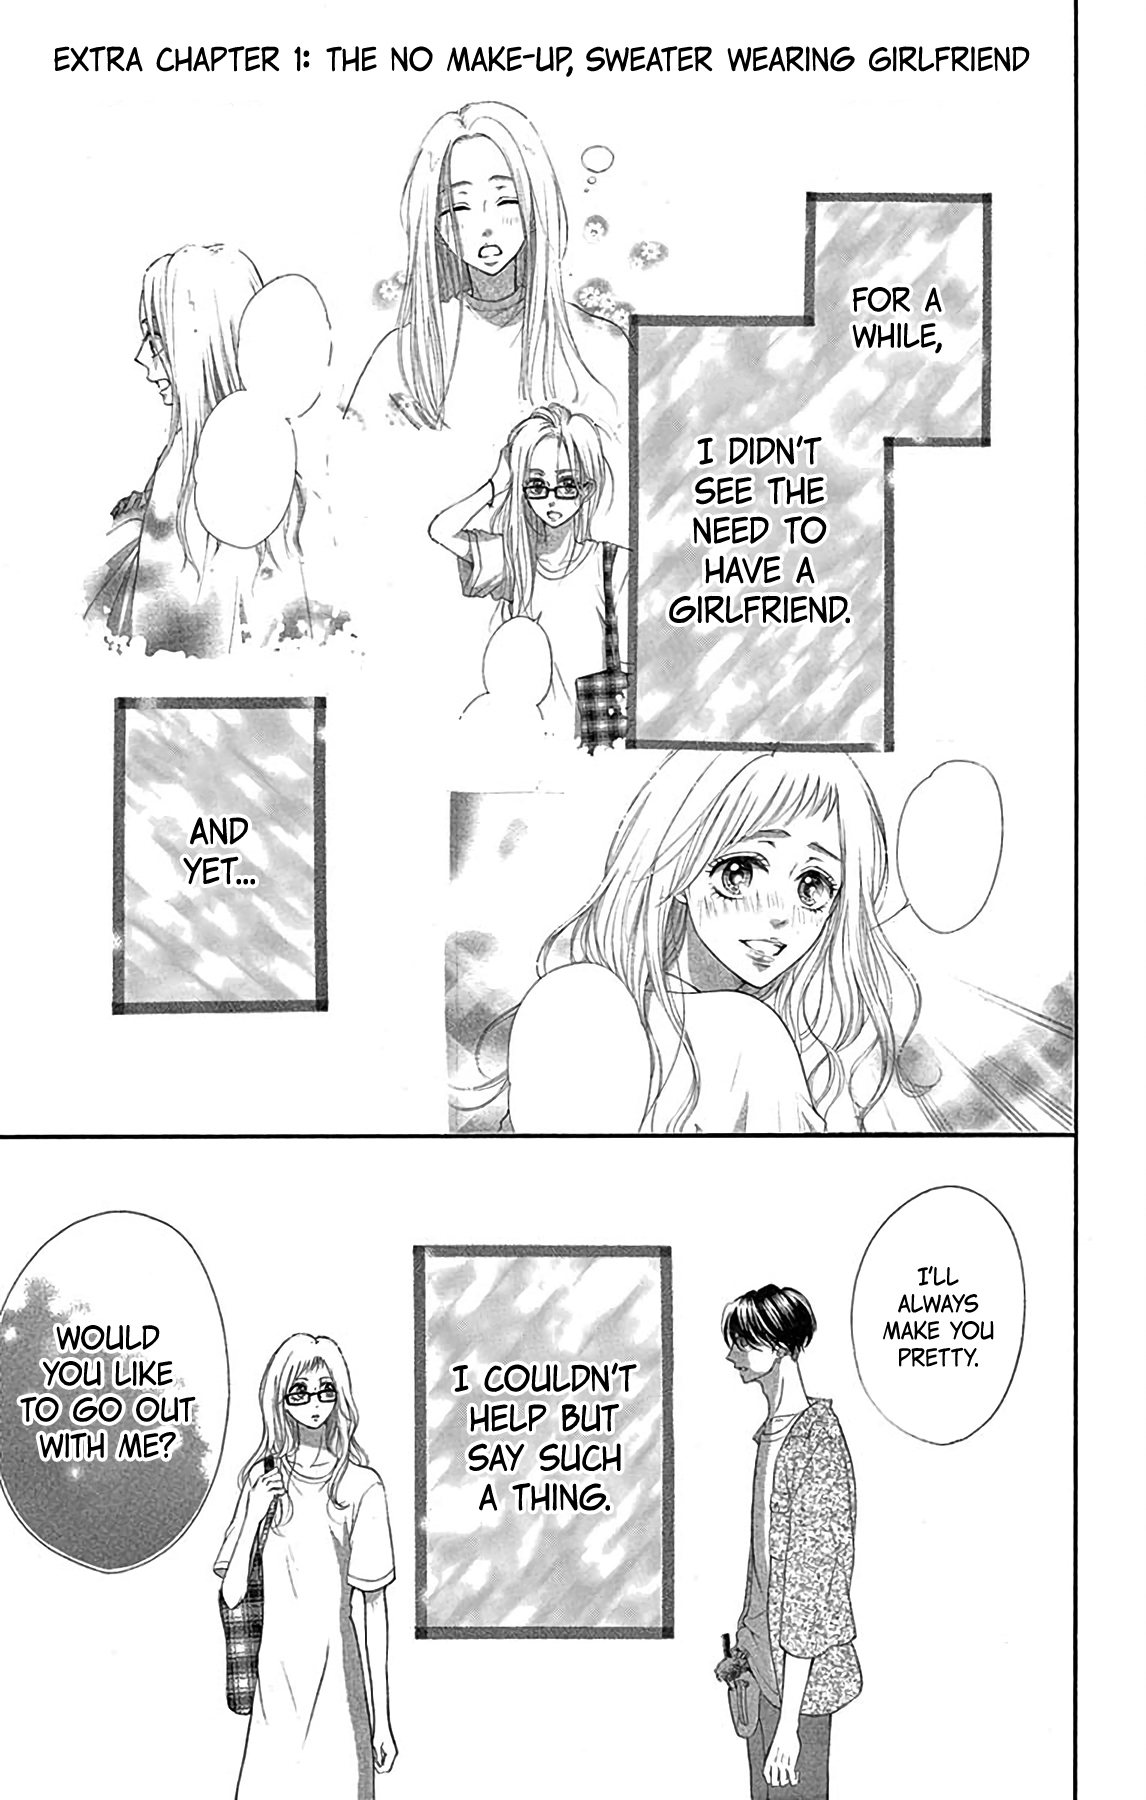 Hey Miss, Don't You Know? Vol. 1 Ch. 3.1 Extra